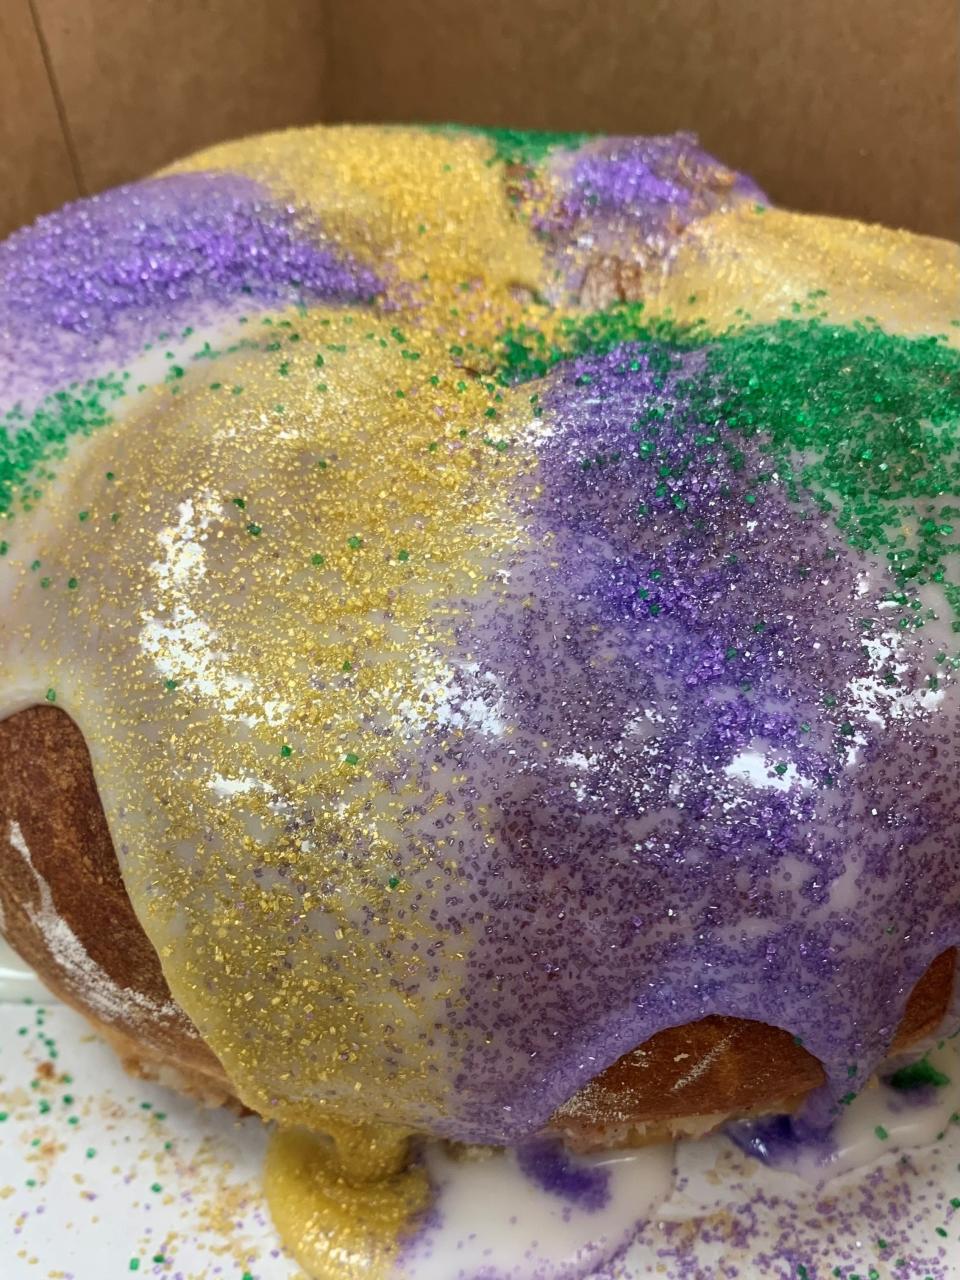 Carrington's Catering will be taking special orders for King Cakes. Each cream cheese-filled cake is about a 12-inch ring. Choose from flavors such as cherry, brown sugar cinnamon and apple.